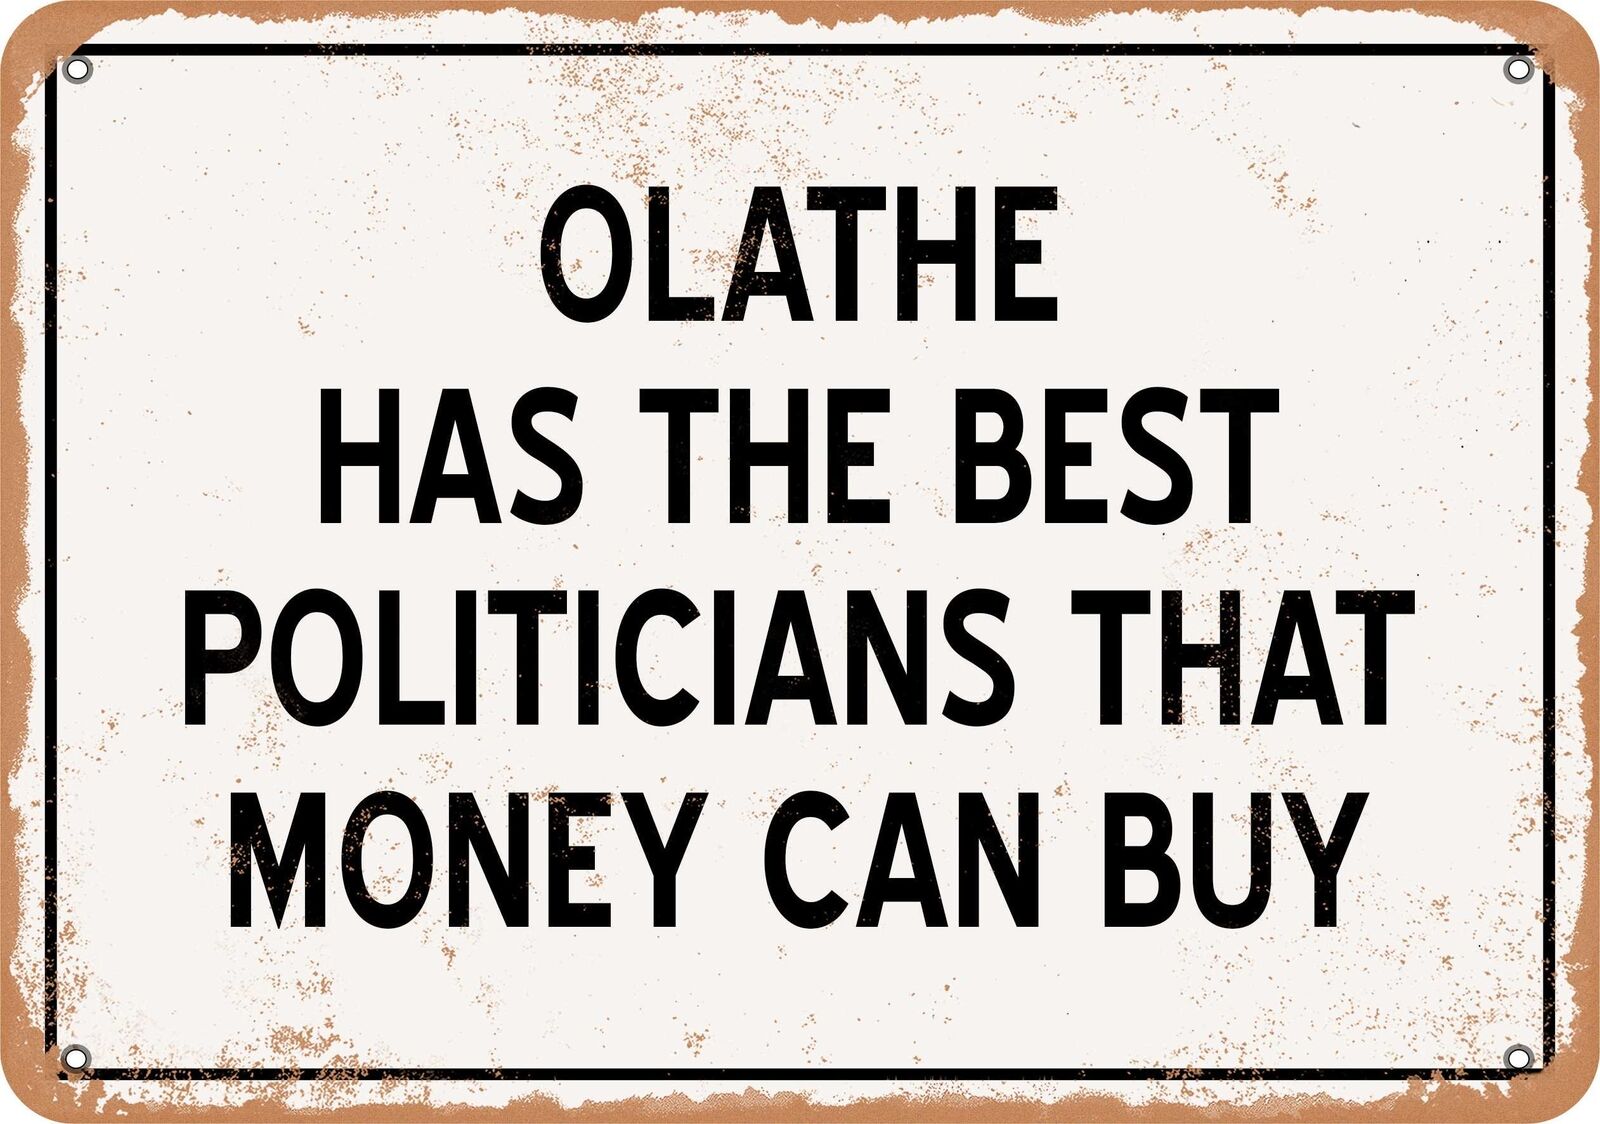 Metal Sign - Olathe Politicians Are the Best Money Can Buy - Rust Look